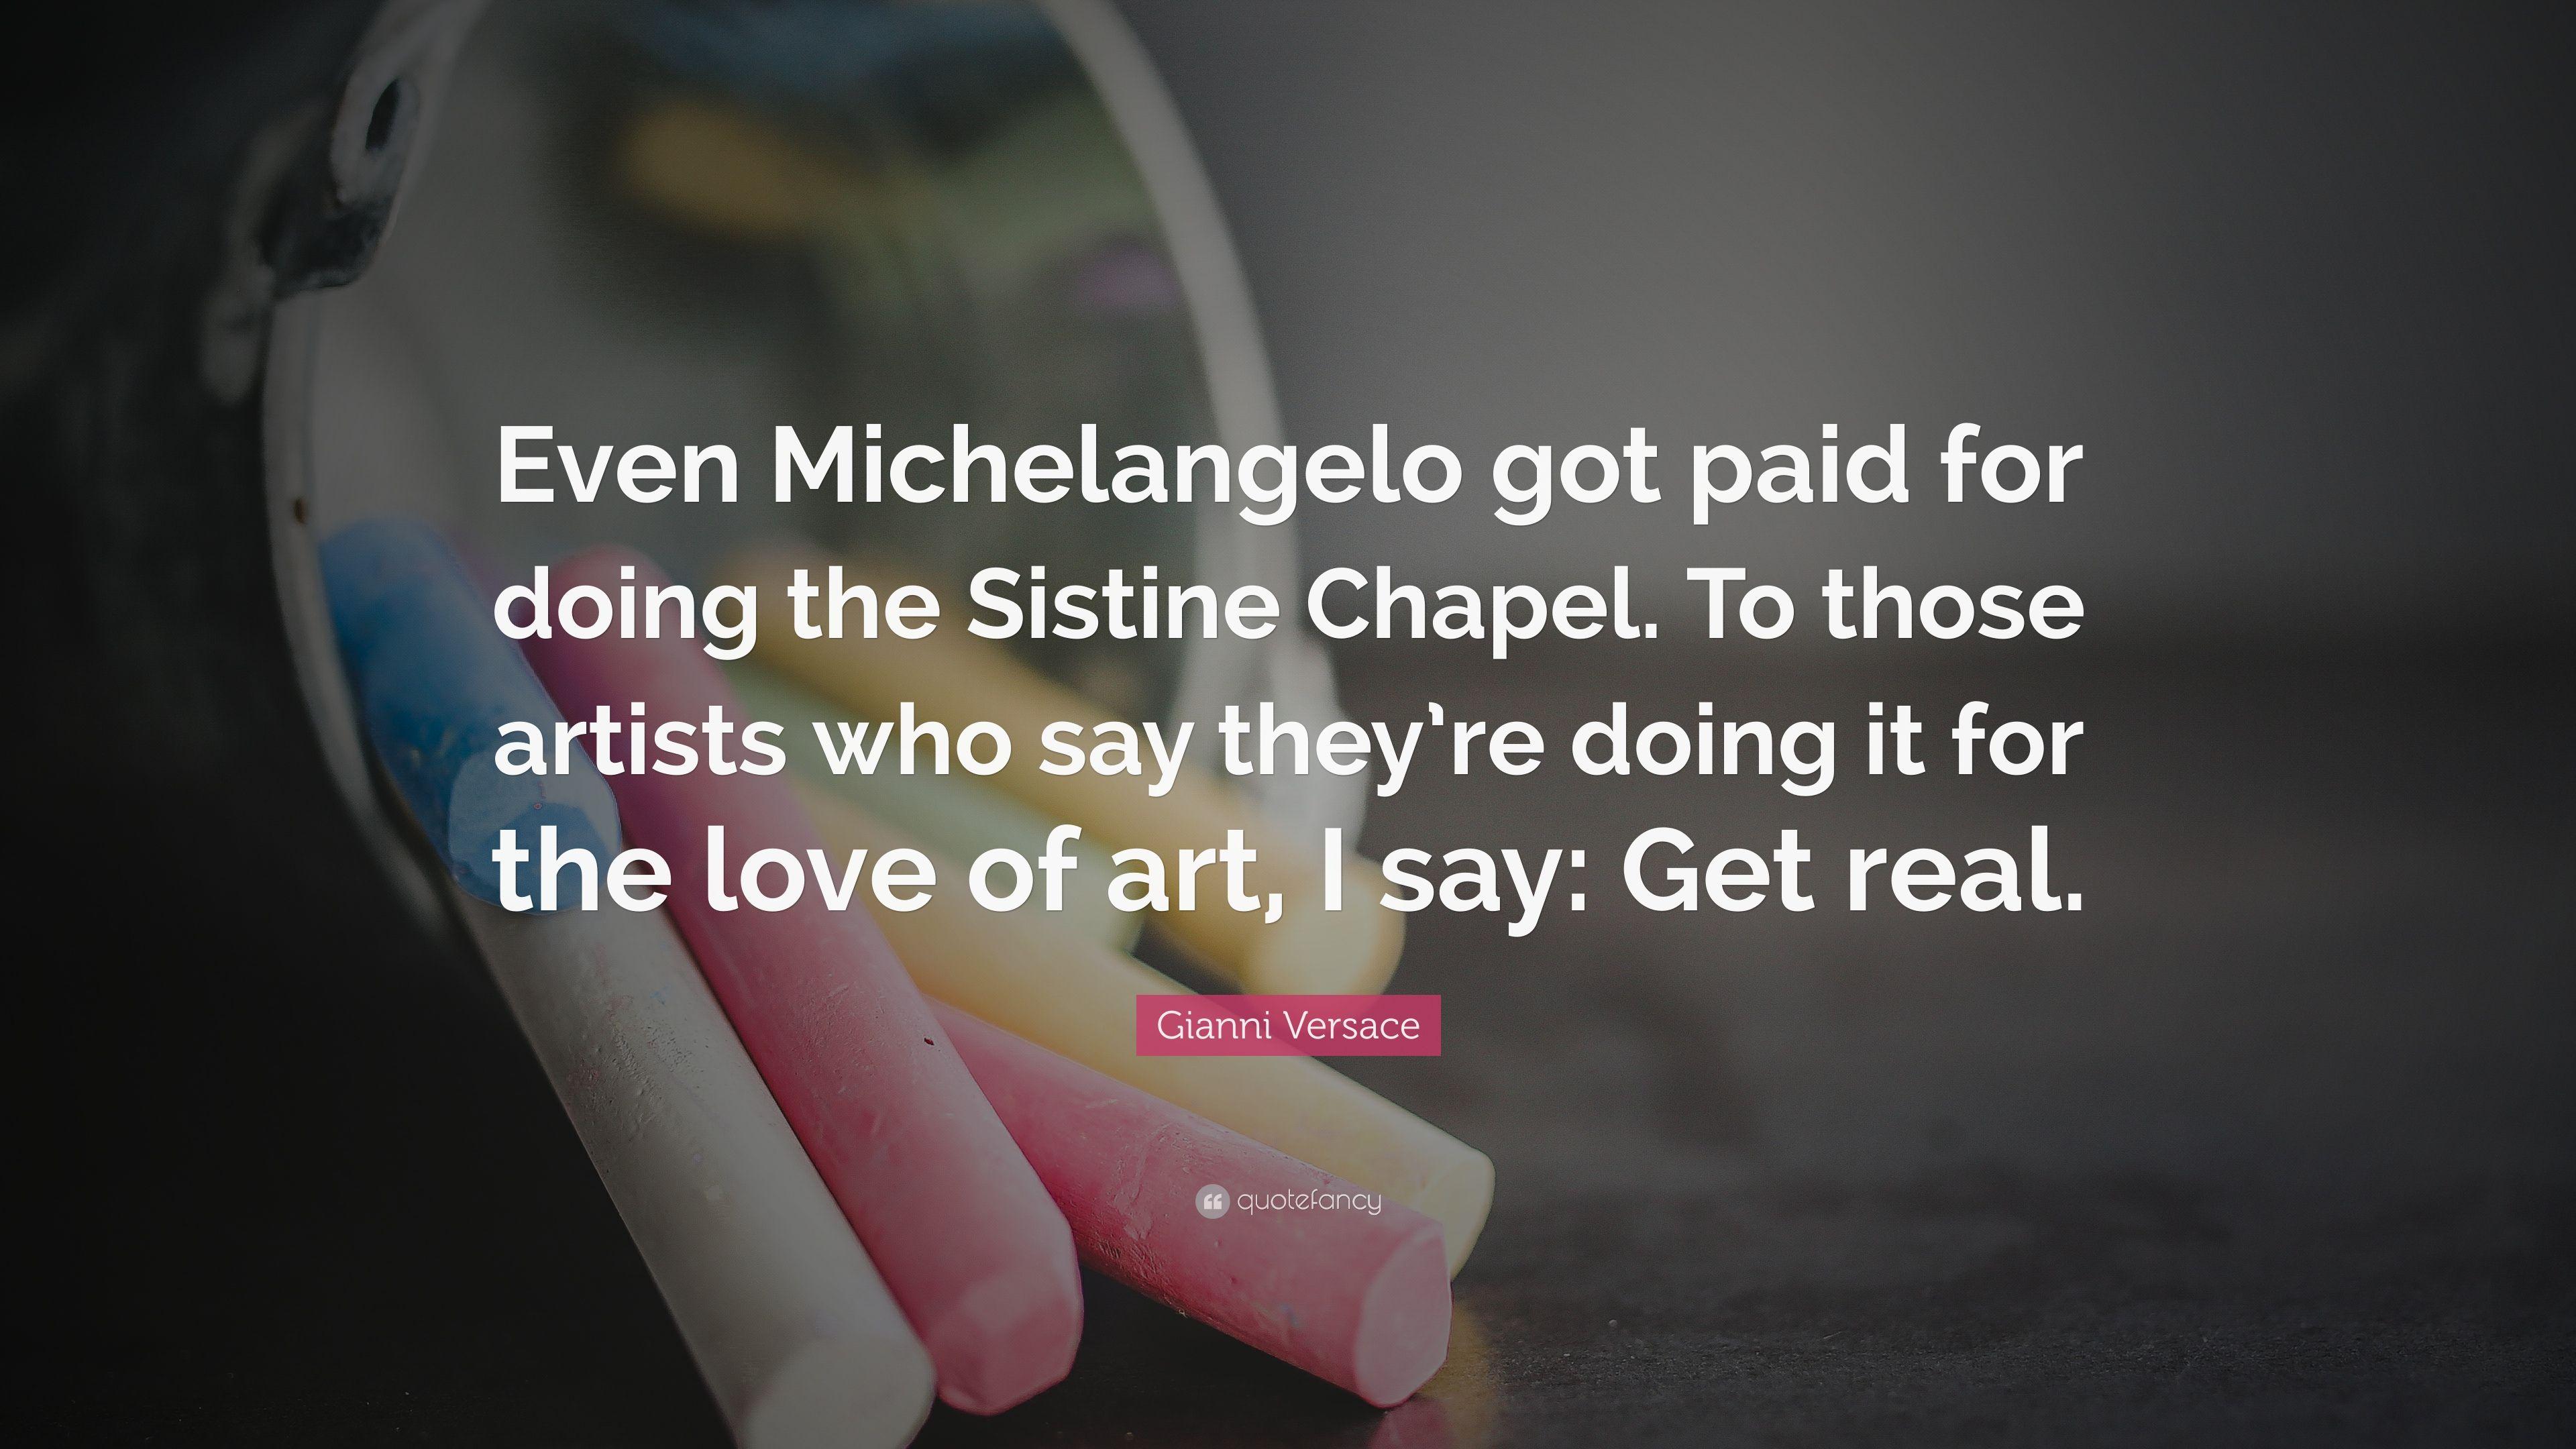 Gianni Versace Quote: “Even Michelangelo got paid for doing